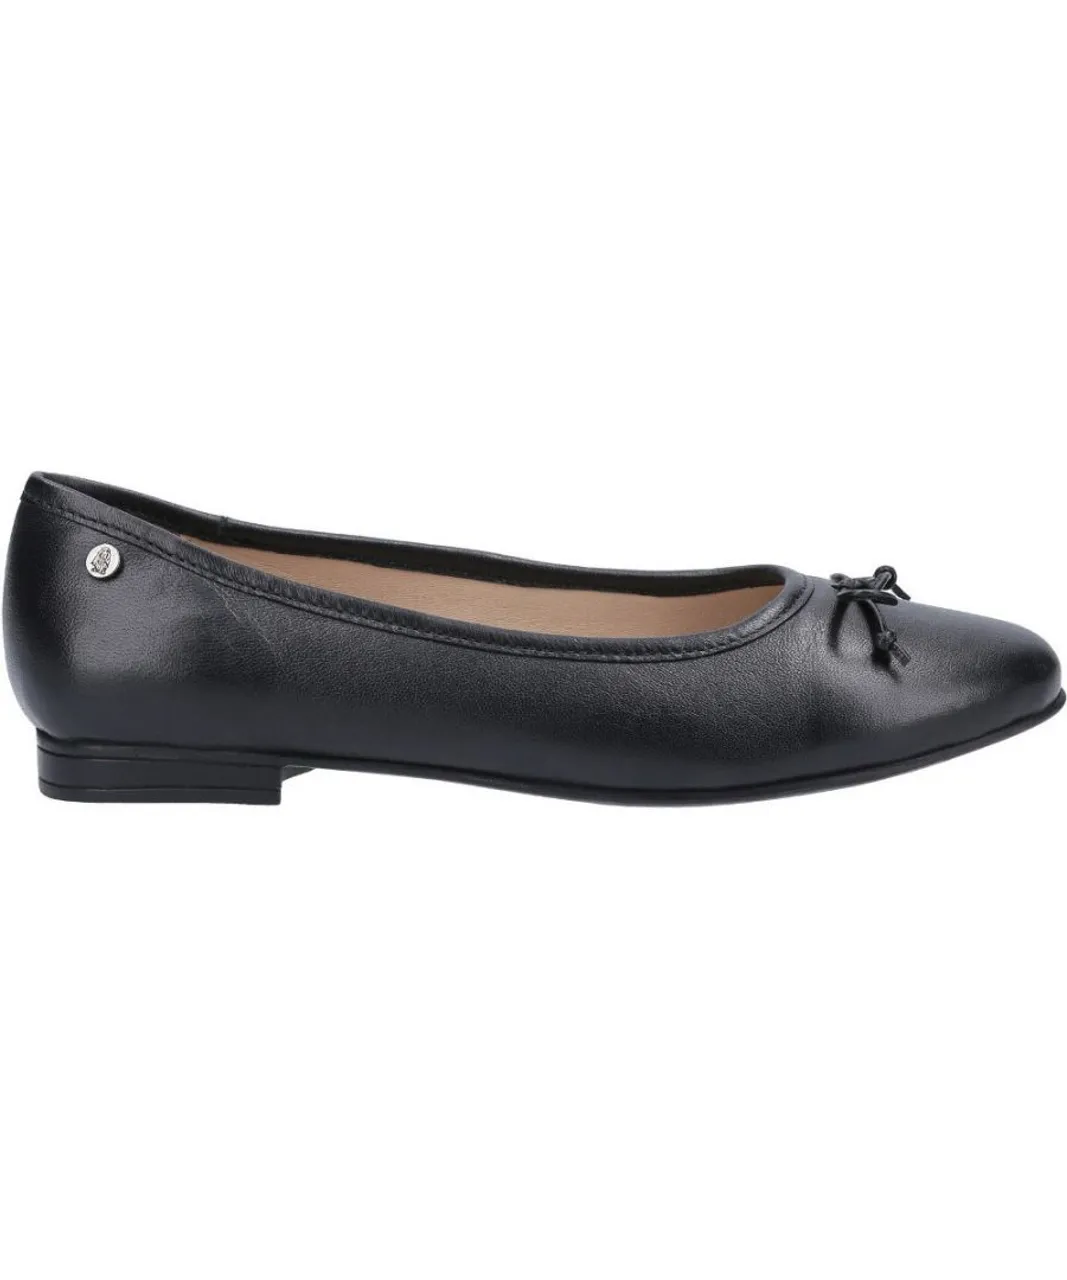 Hush Puppies Womens Naomi Leather Slip On Ballet Shoes - Black